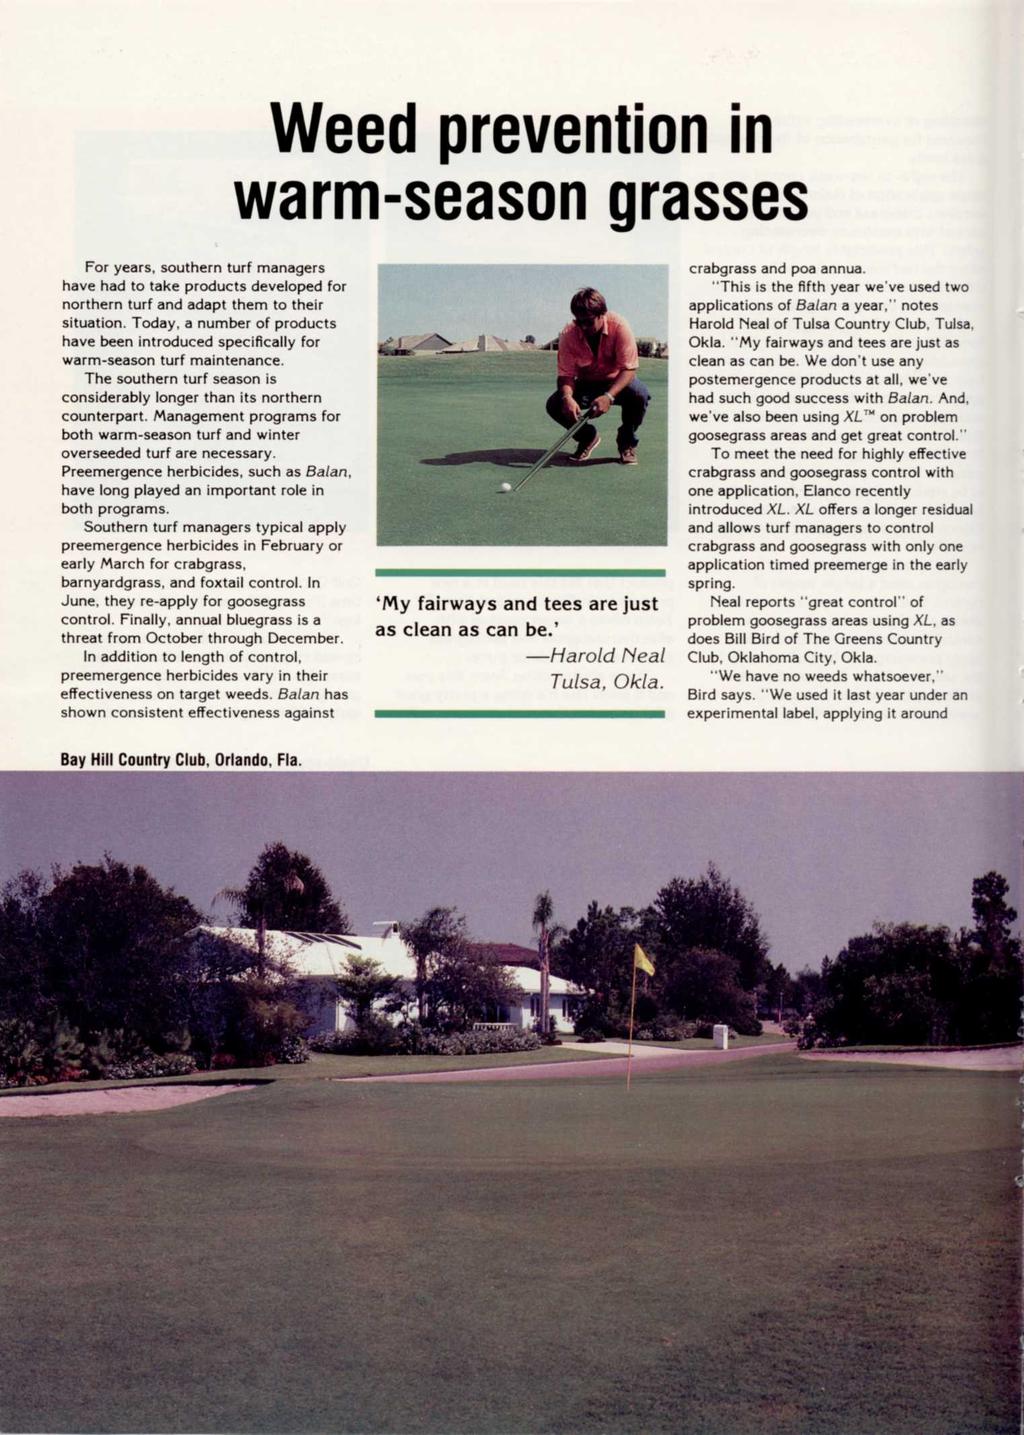 Weed prevention in warm-season grasses For years, southern turf managers have had to take products developed for northern turf and adapt them to their situation.